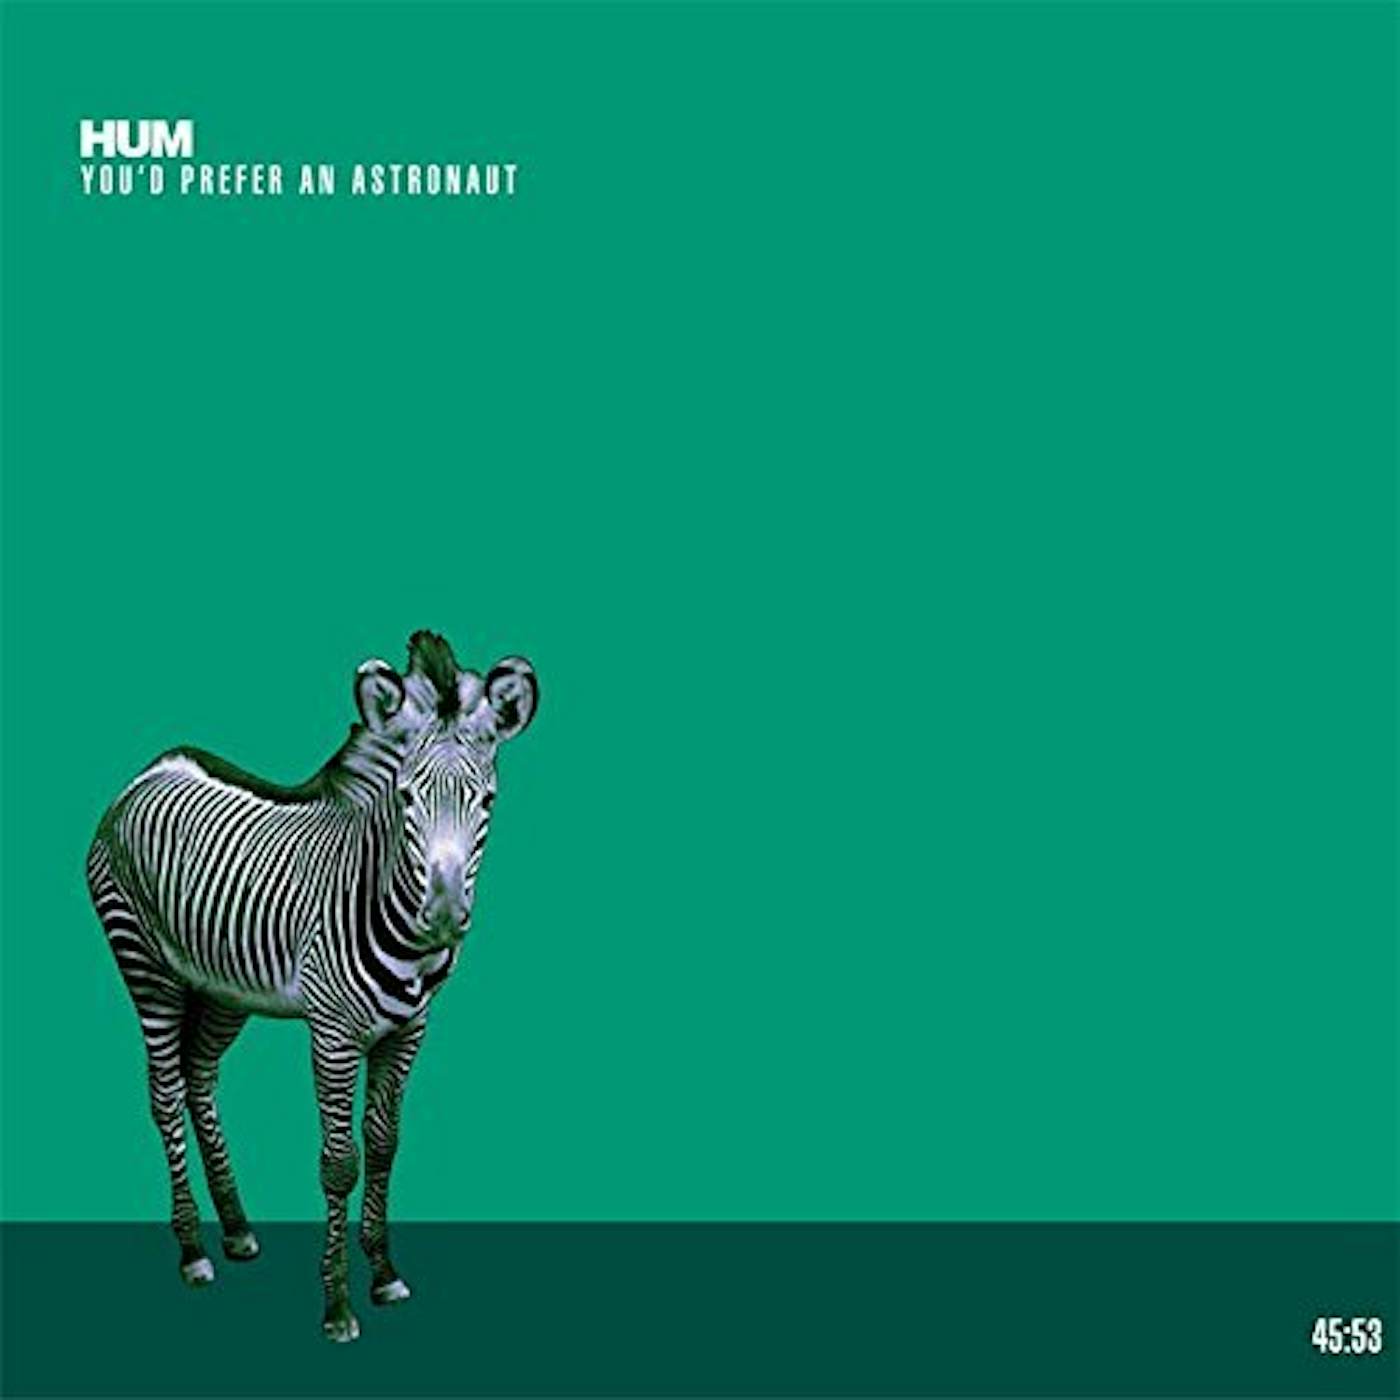 Hum YOU'D PREFER AN ASTRONAUT Vinyl Record - Colored Vinyl, Limited Edition